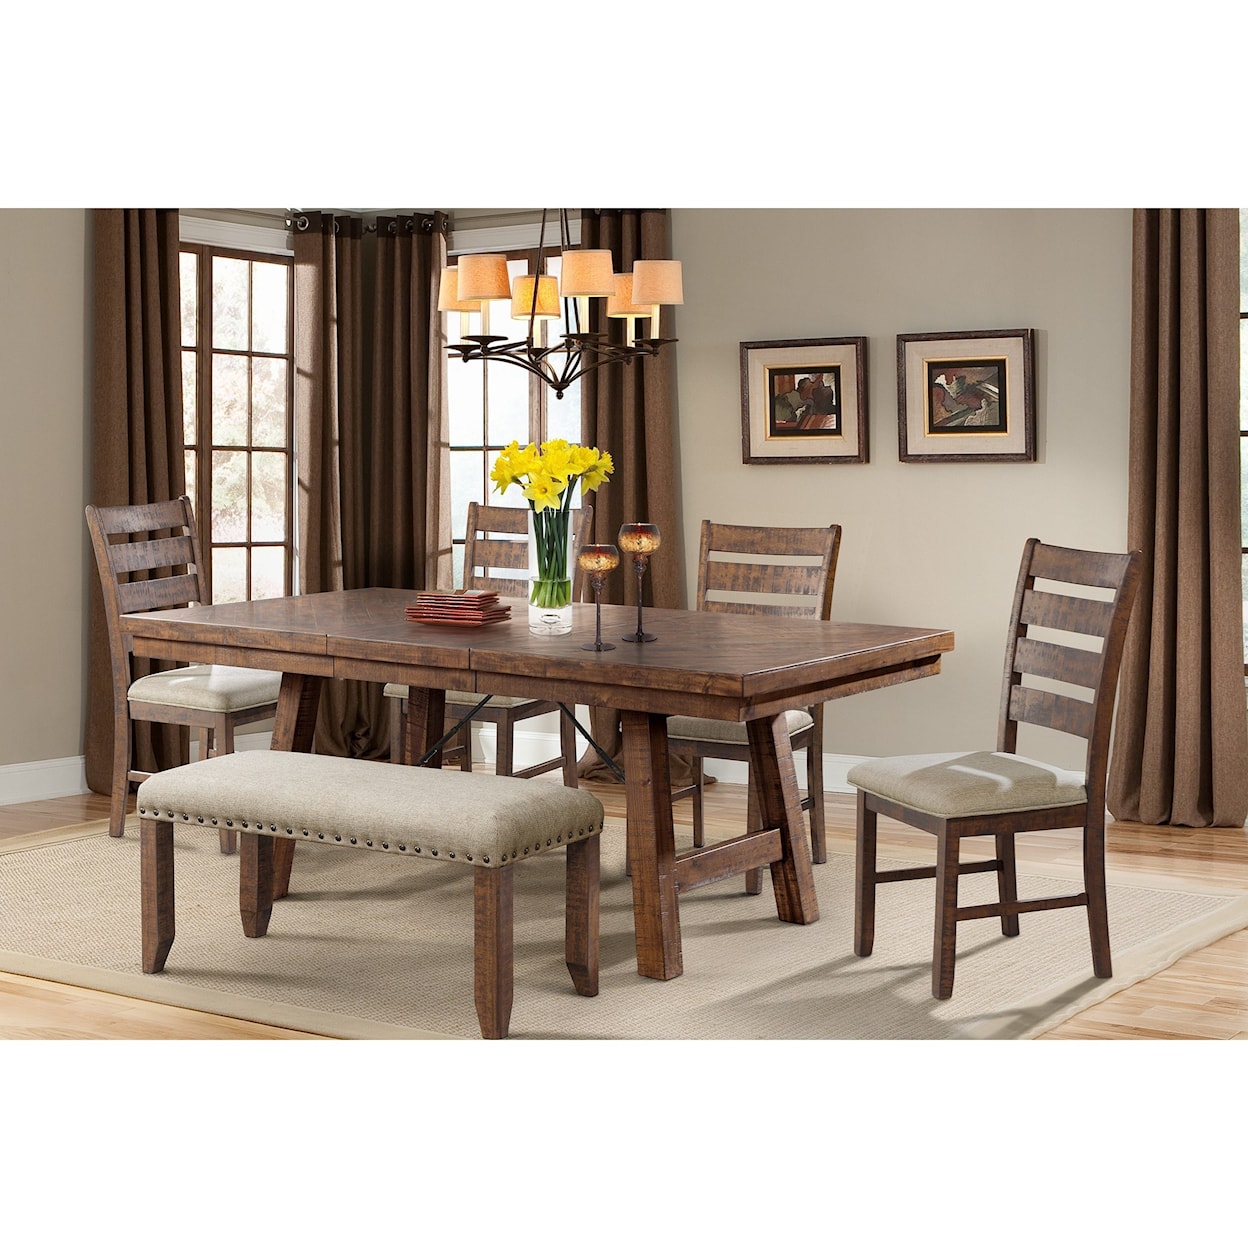 Elements Jax Dining Table and Chair Set with Bench